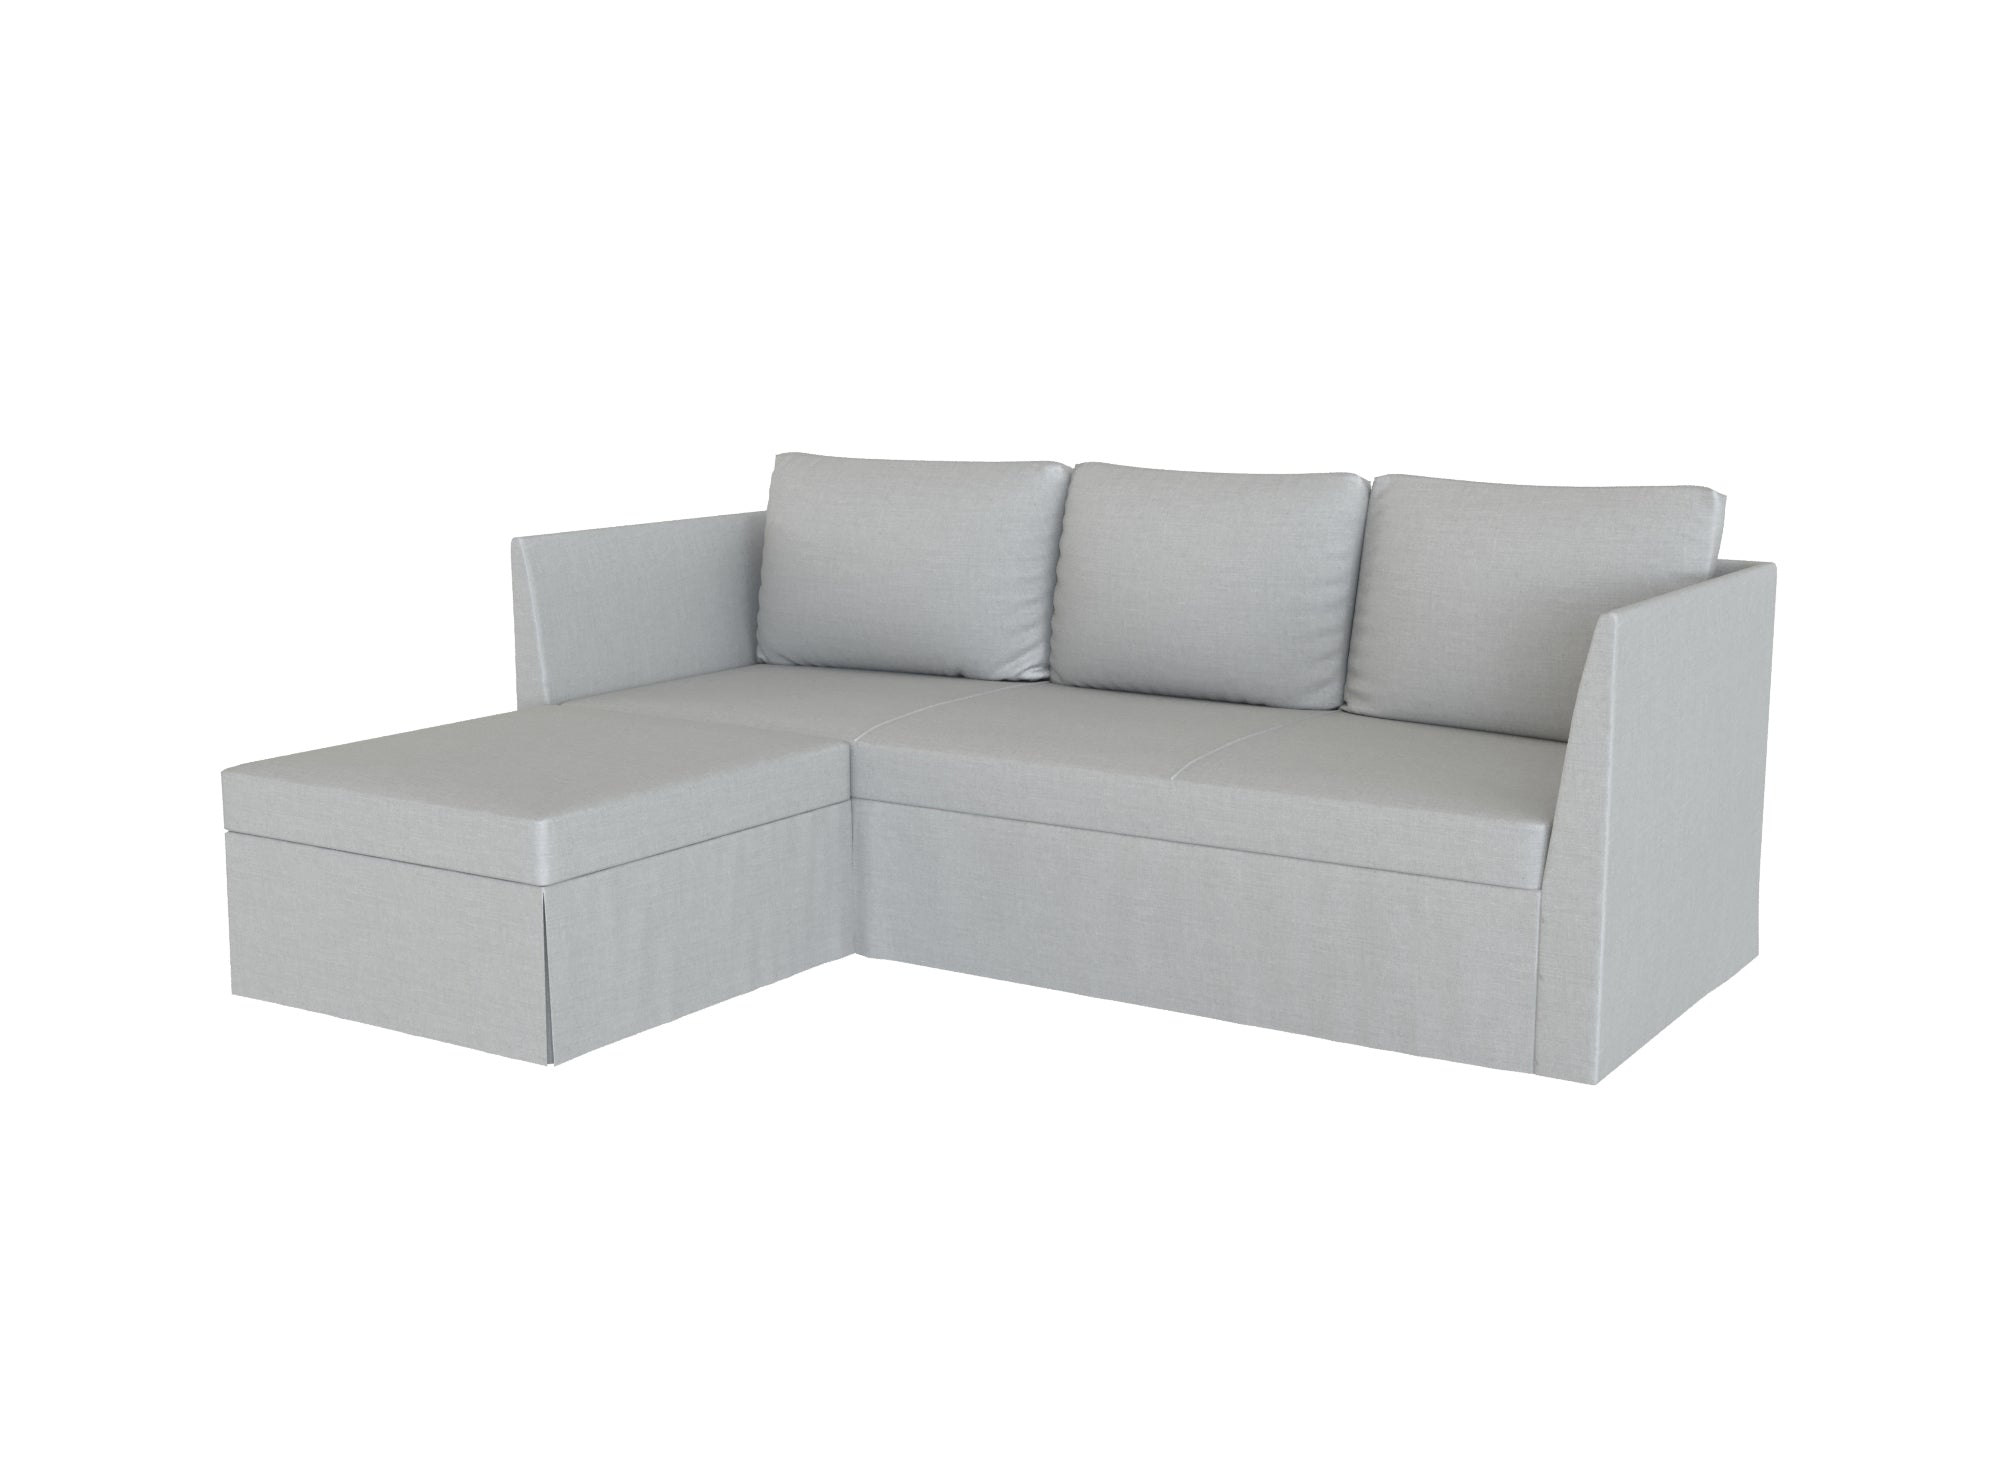 Ready scarf Inconvenience Brathult 3 Seat Sectional Sofa Cover | LindaKale